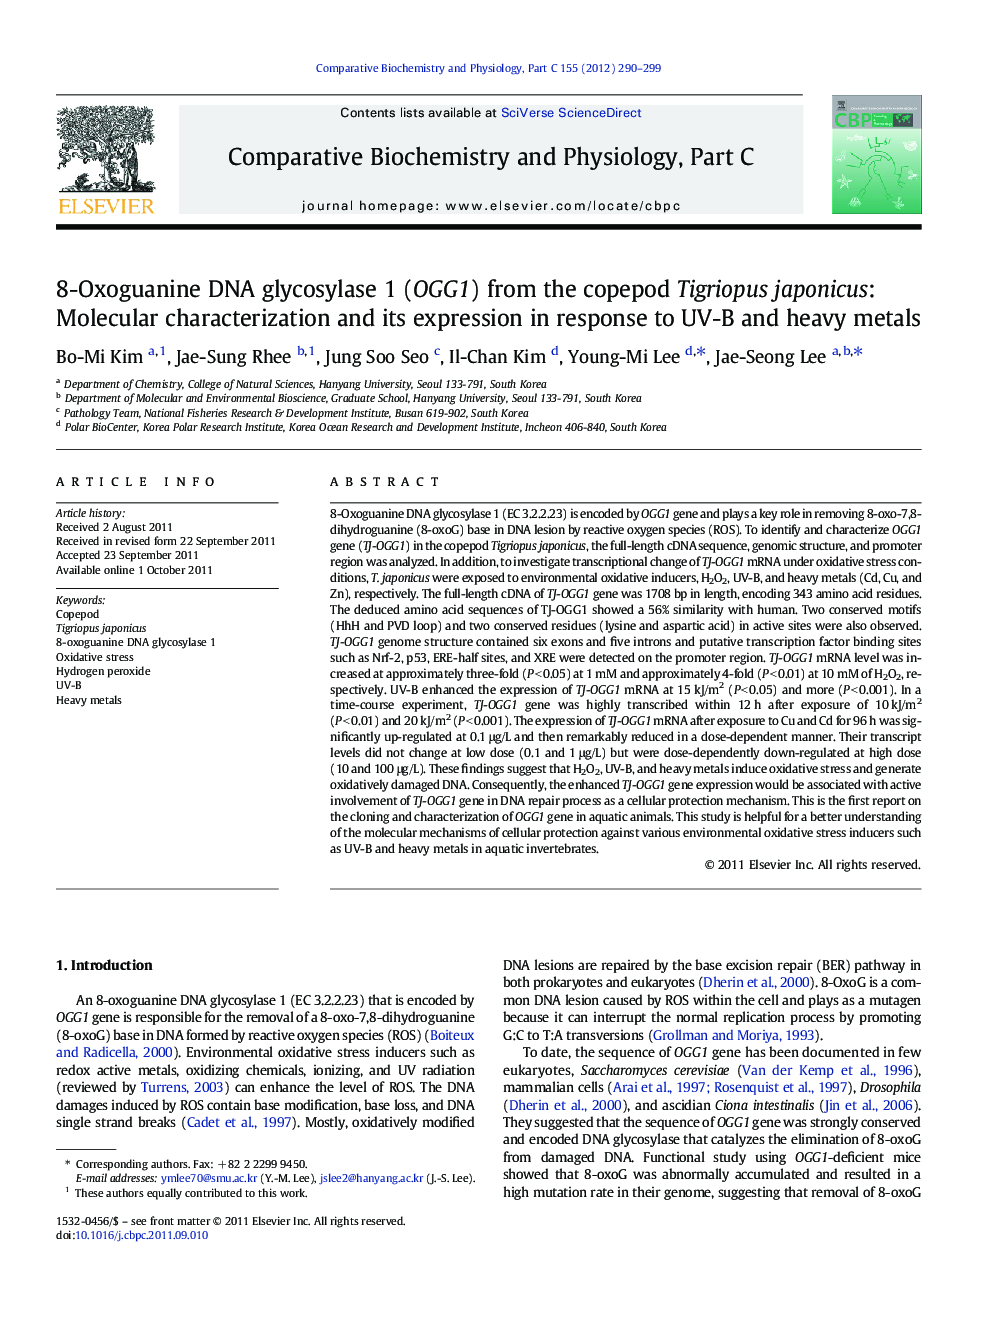 8-Oxoguanine DNA glycosylase 1 (OGG1) from the copepod Tigriopus japonicus: Molecular characterization and its expression in response to UV-B and heavy metals